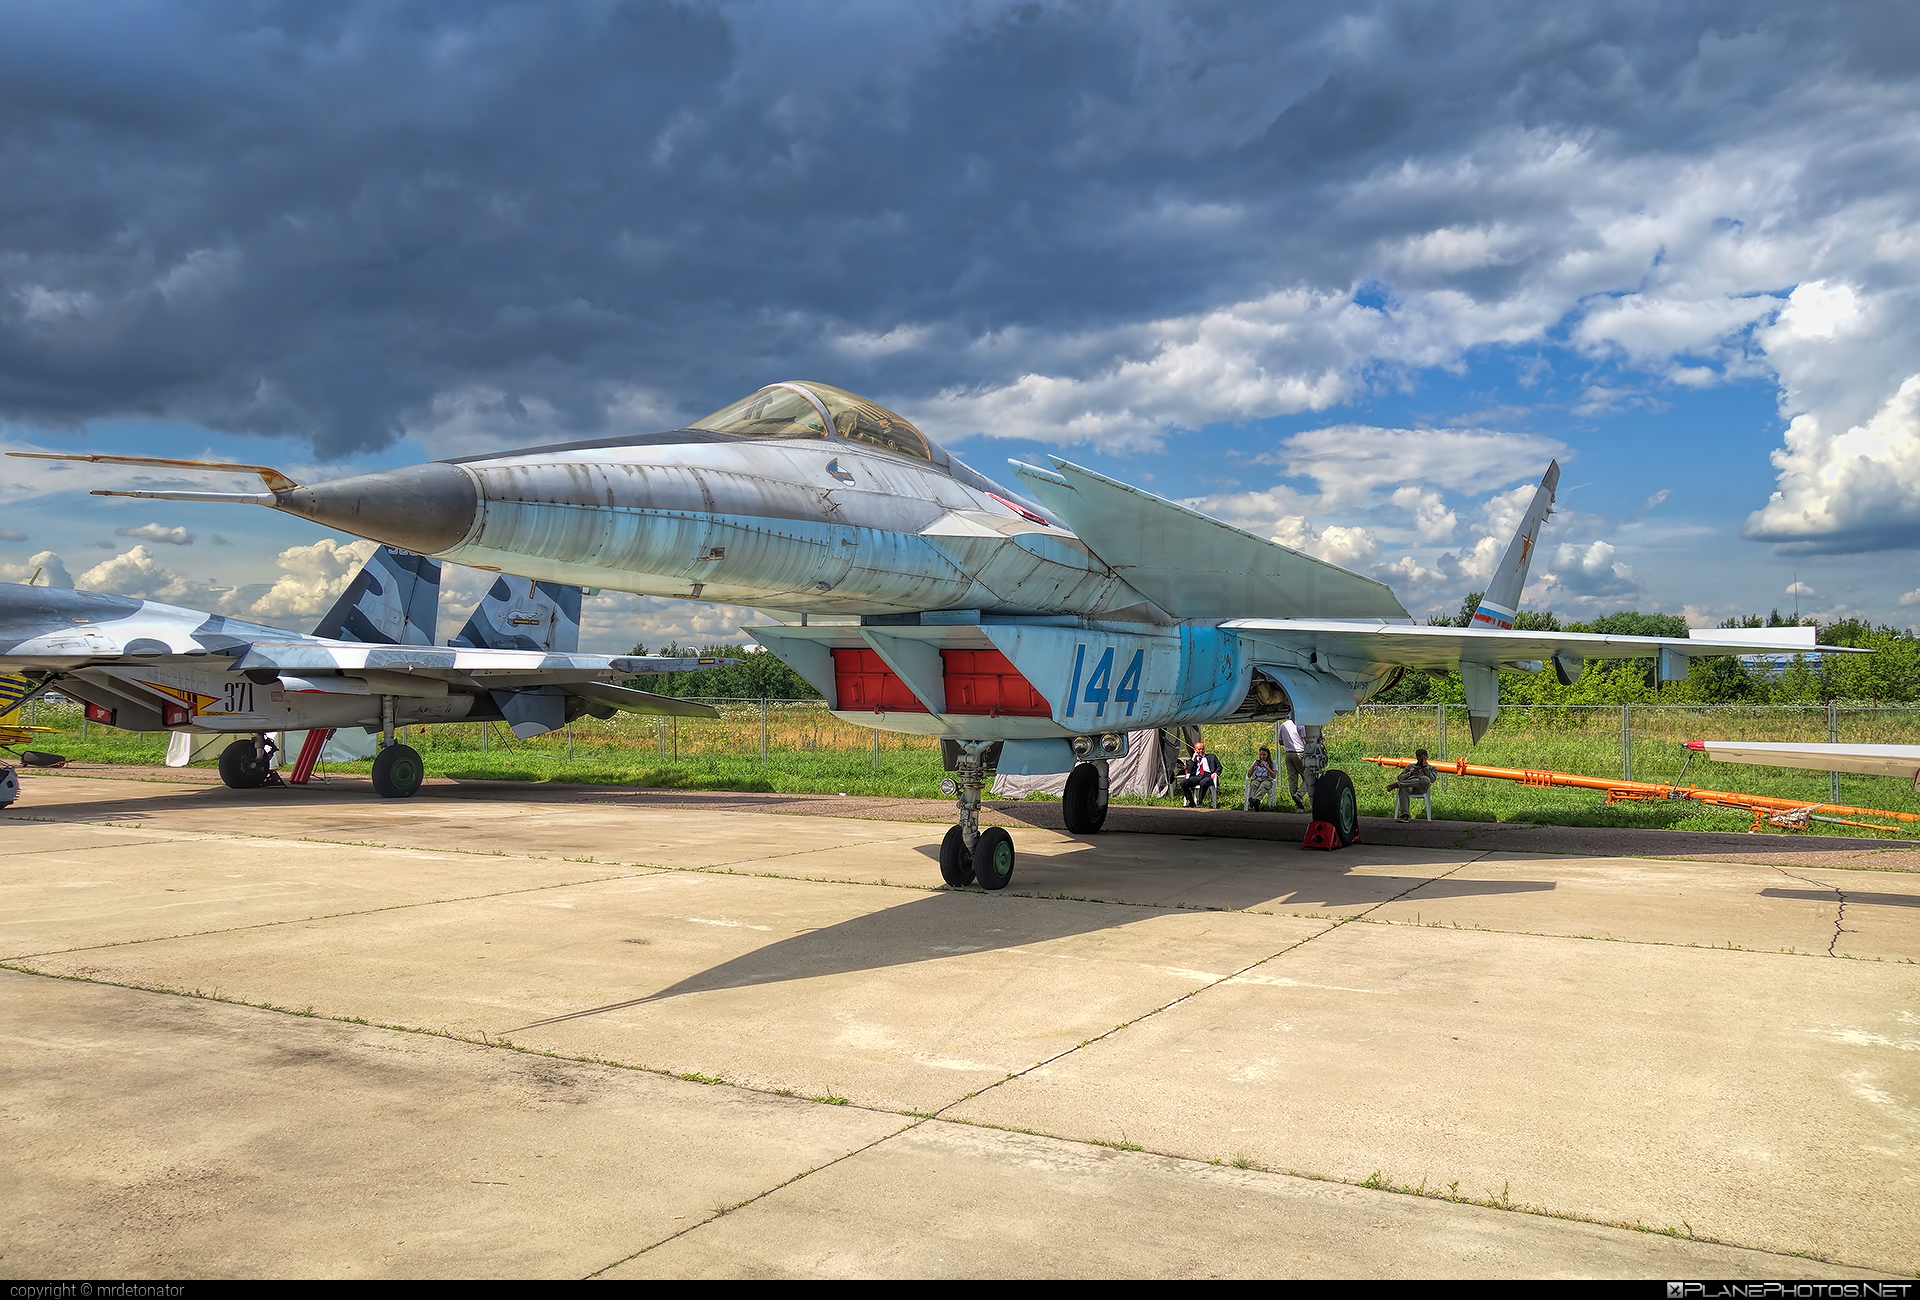 Mikoyan-Gurevich Project 1.44 - 144 operated by RSK MiG #maks2017 #mig #mig144 #migproject144 #mikoyangurevich #rskmig